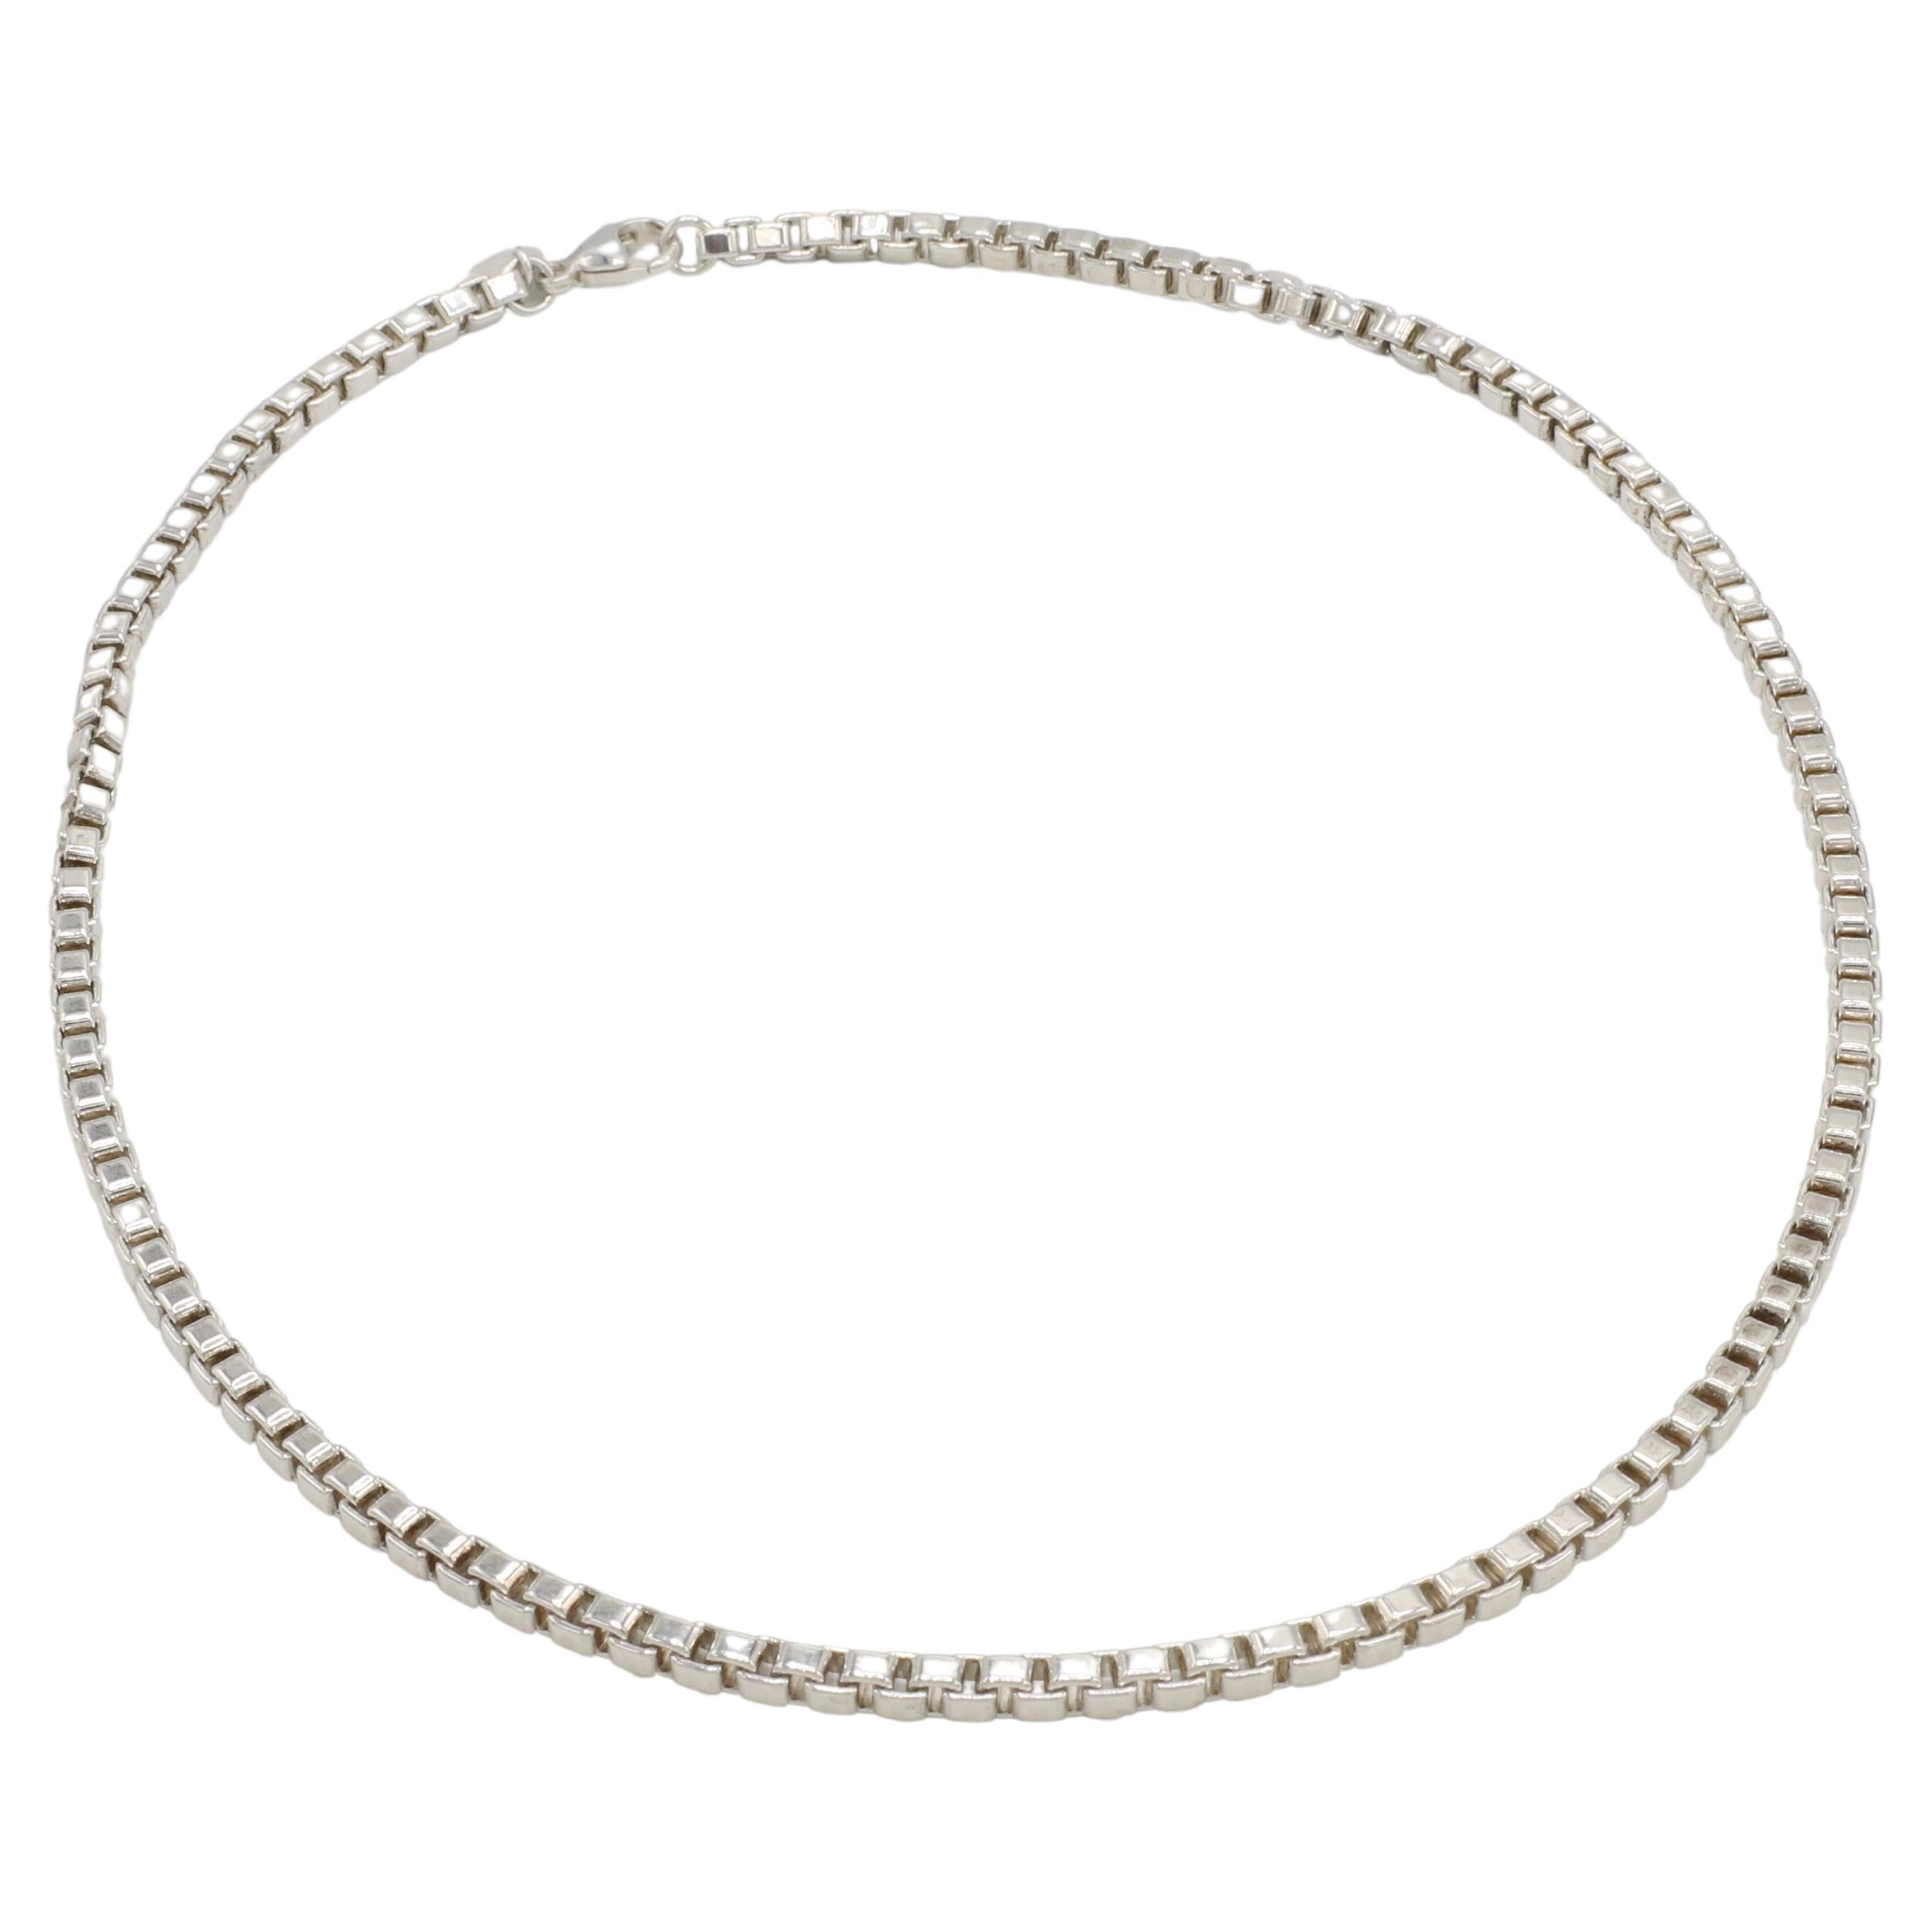 Tiffany & Co. Venetian Sterling Silver Box Chain Link Necklace 